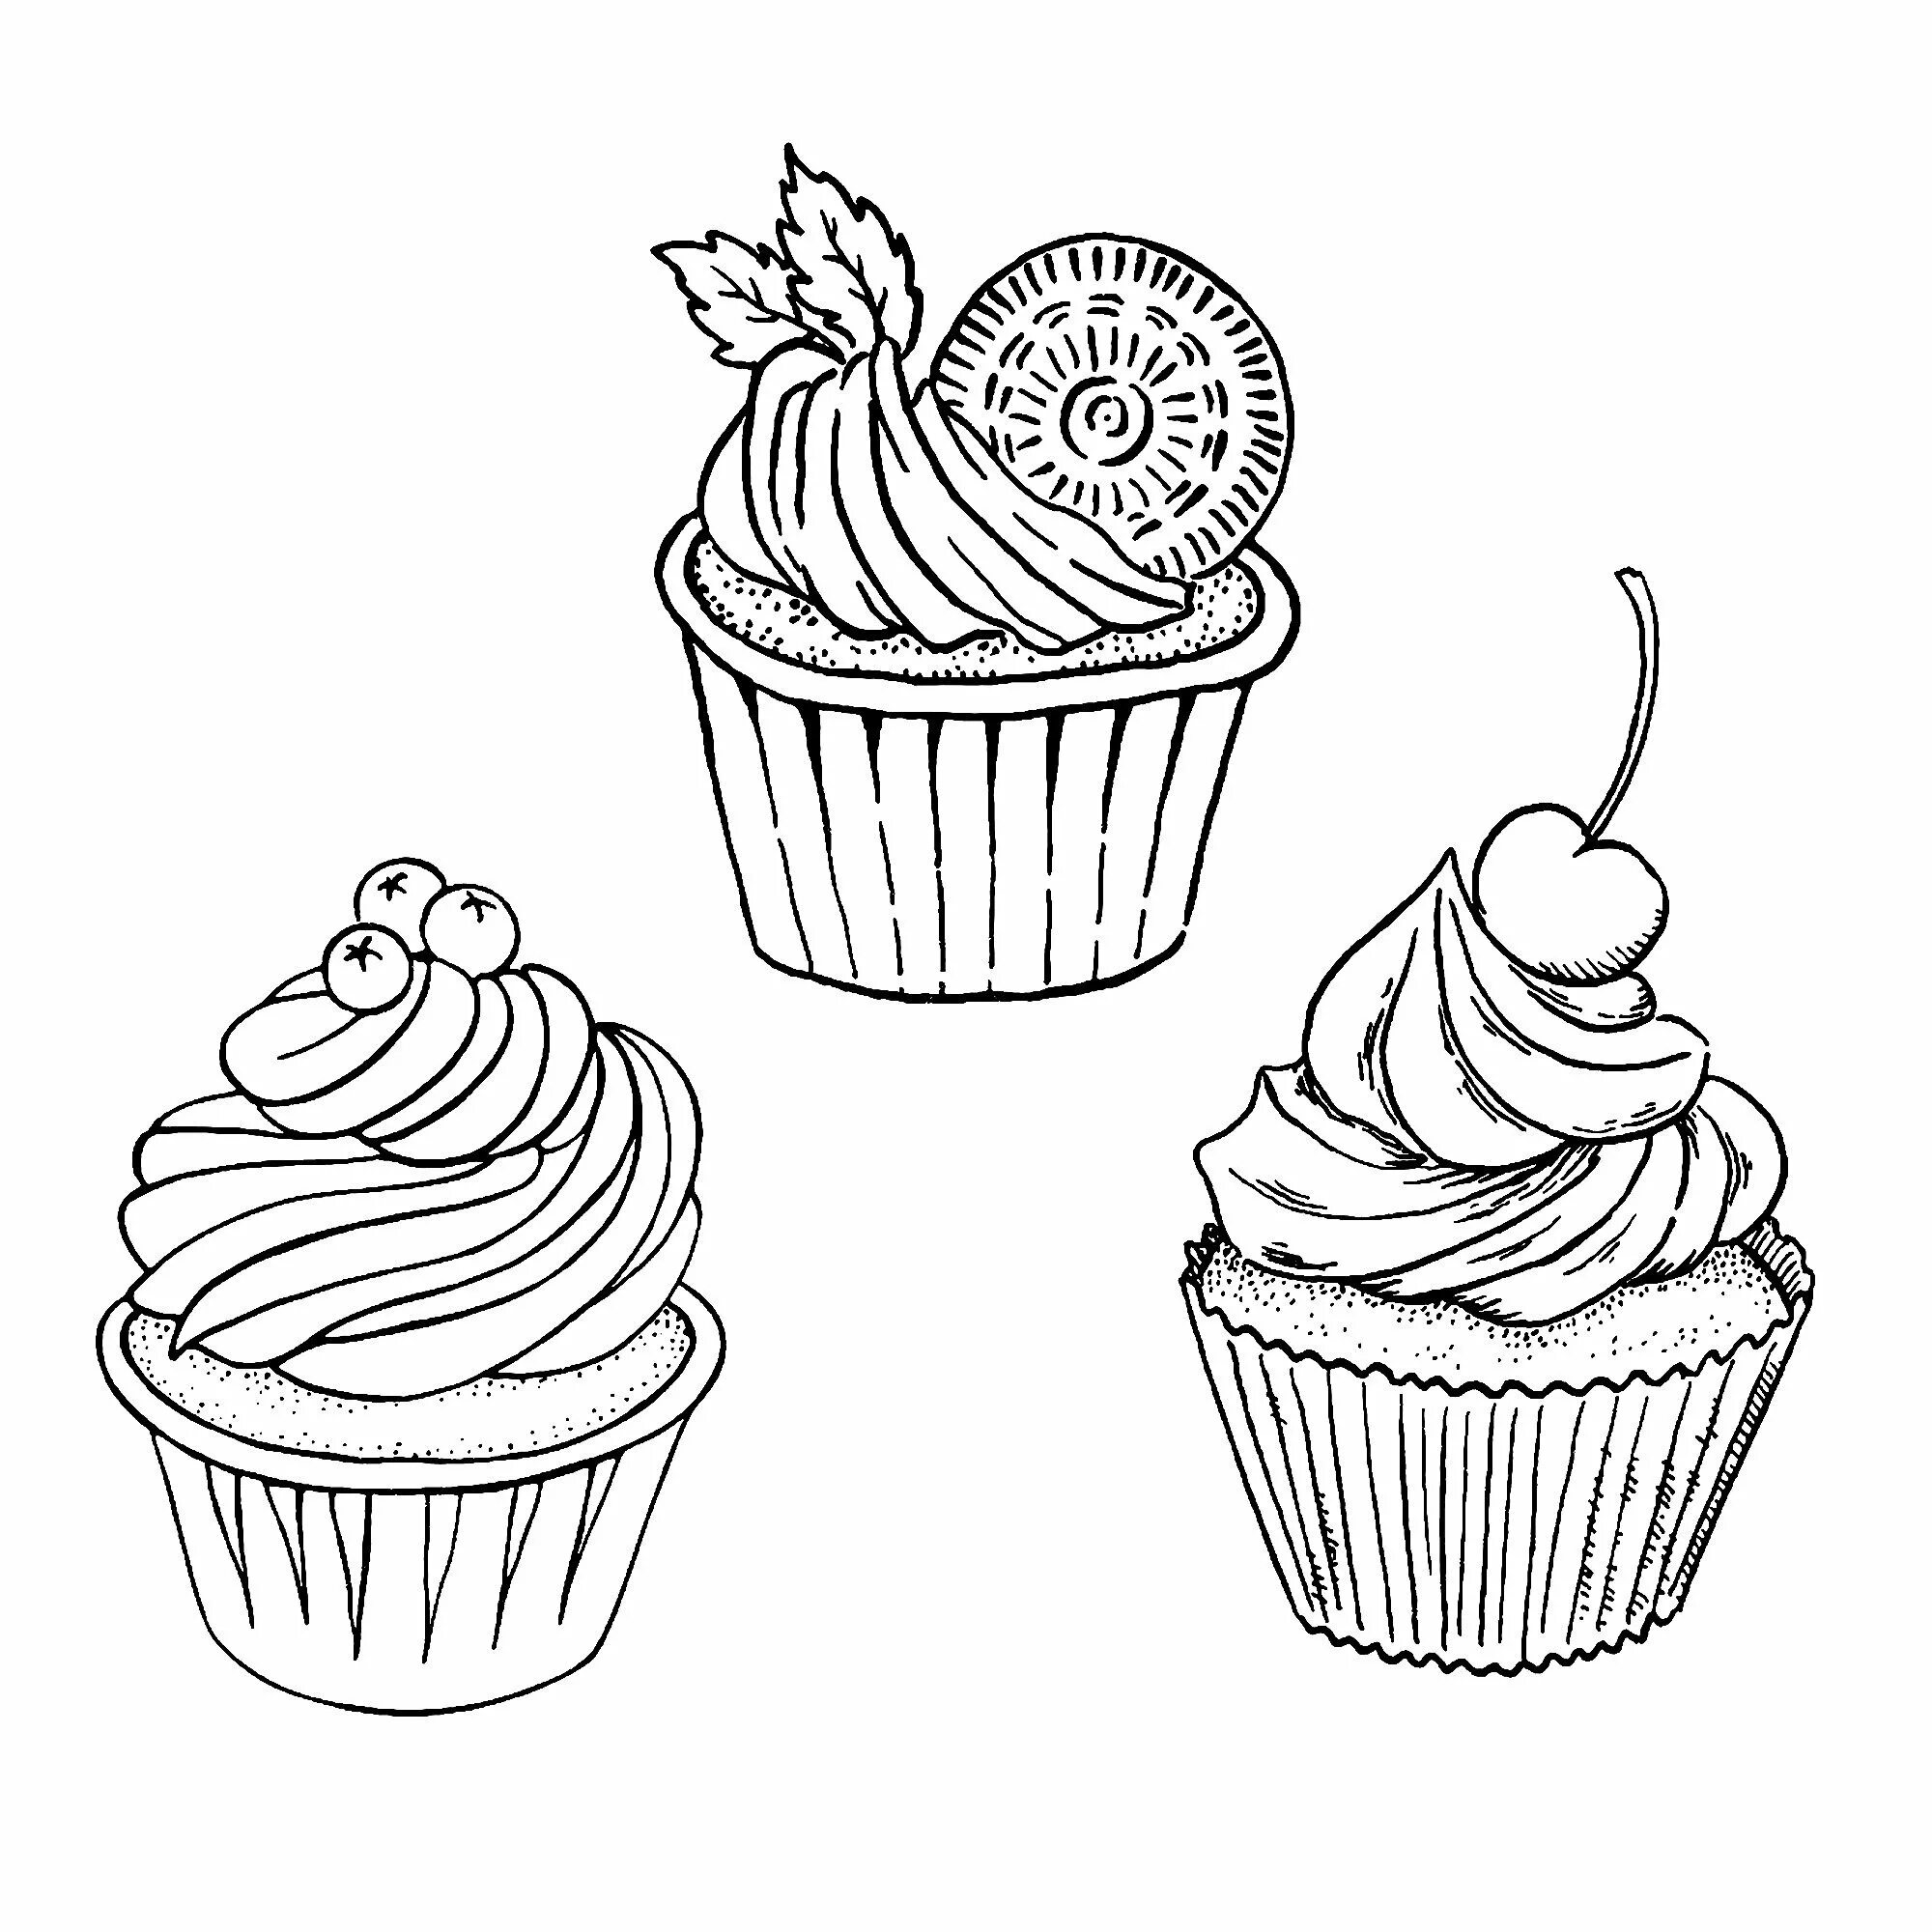 Cupcakes and pies #6